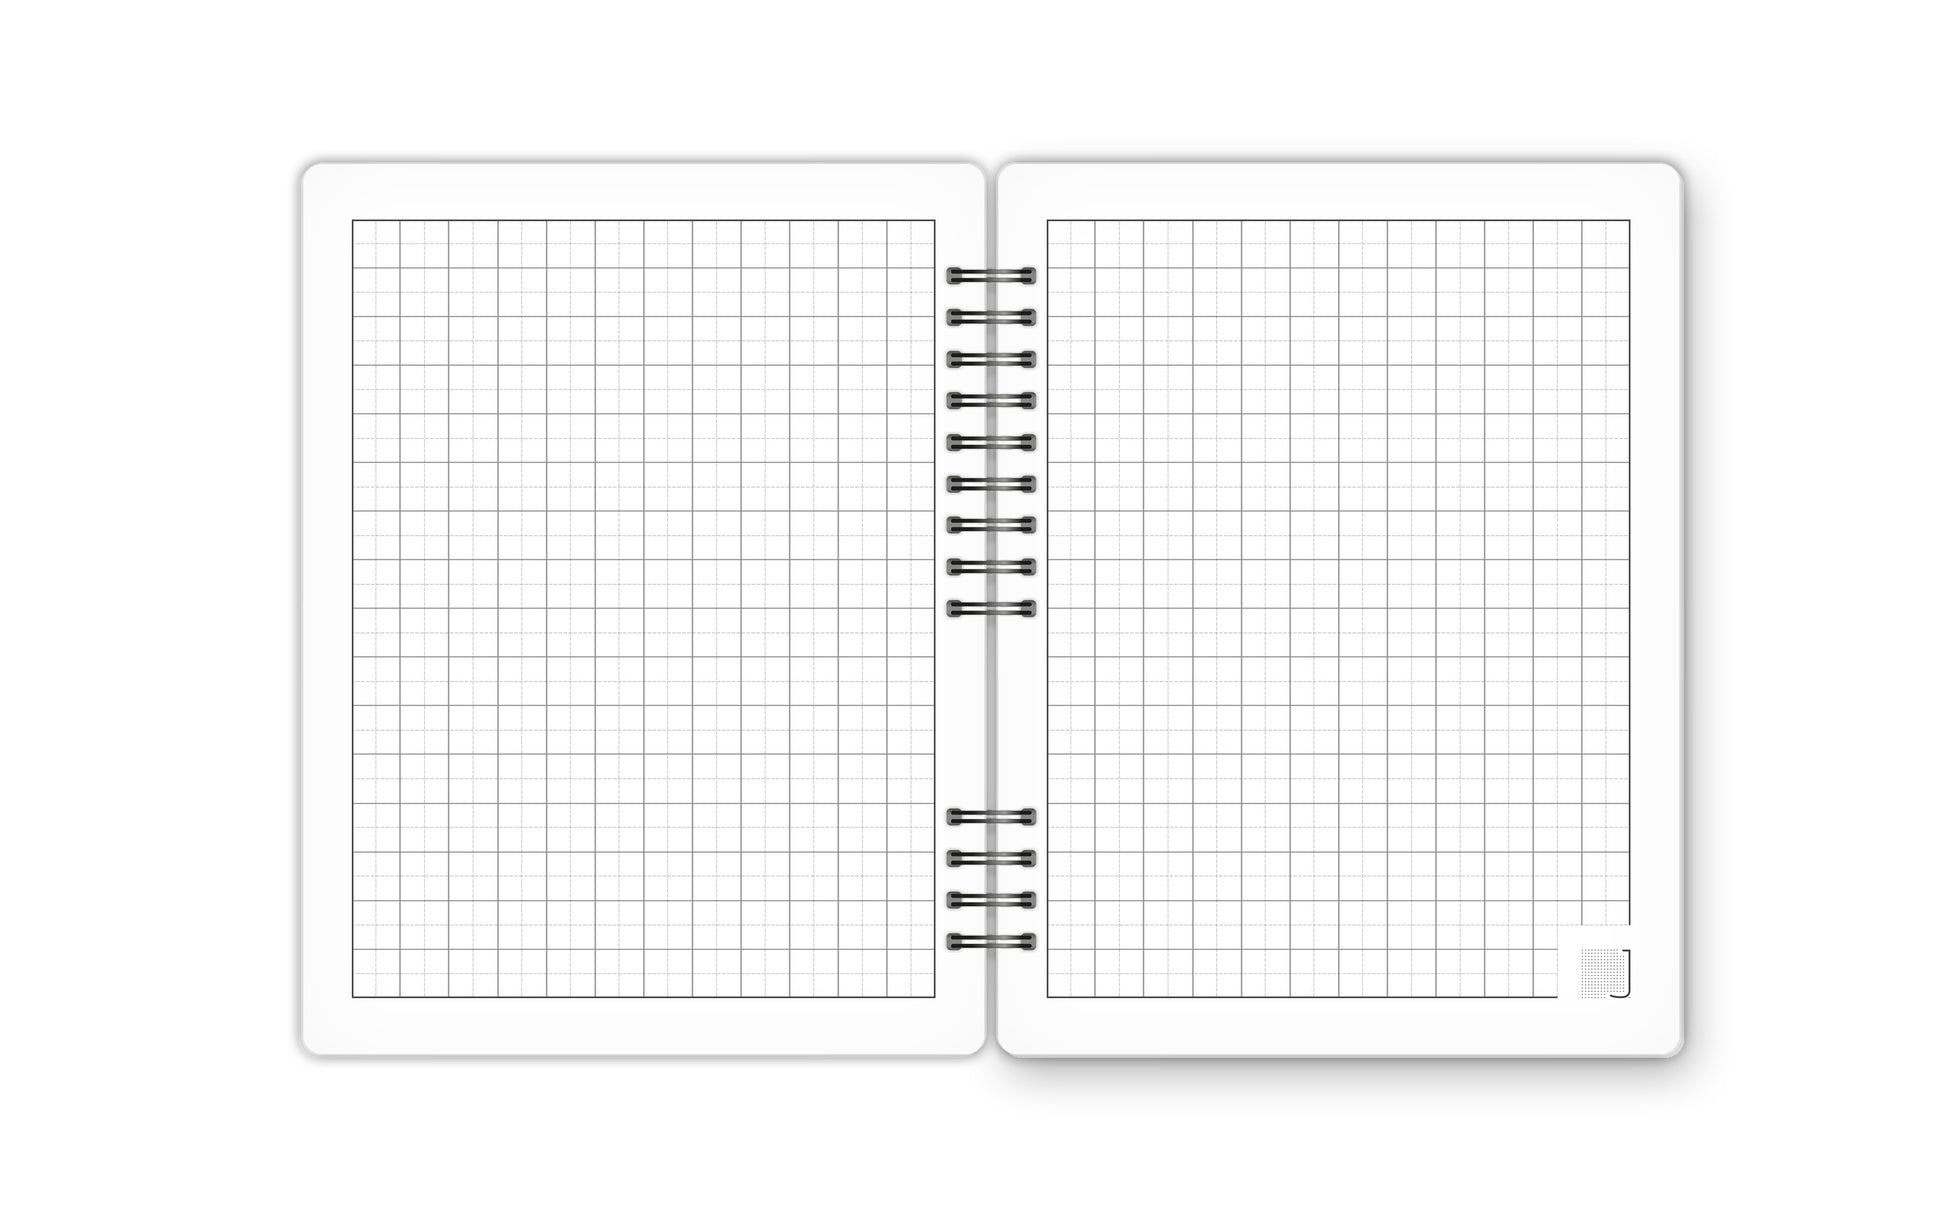 Square Grid - 18X14 cm - 75 Sheets | White - from Journals